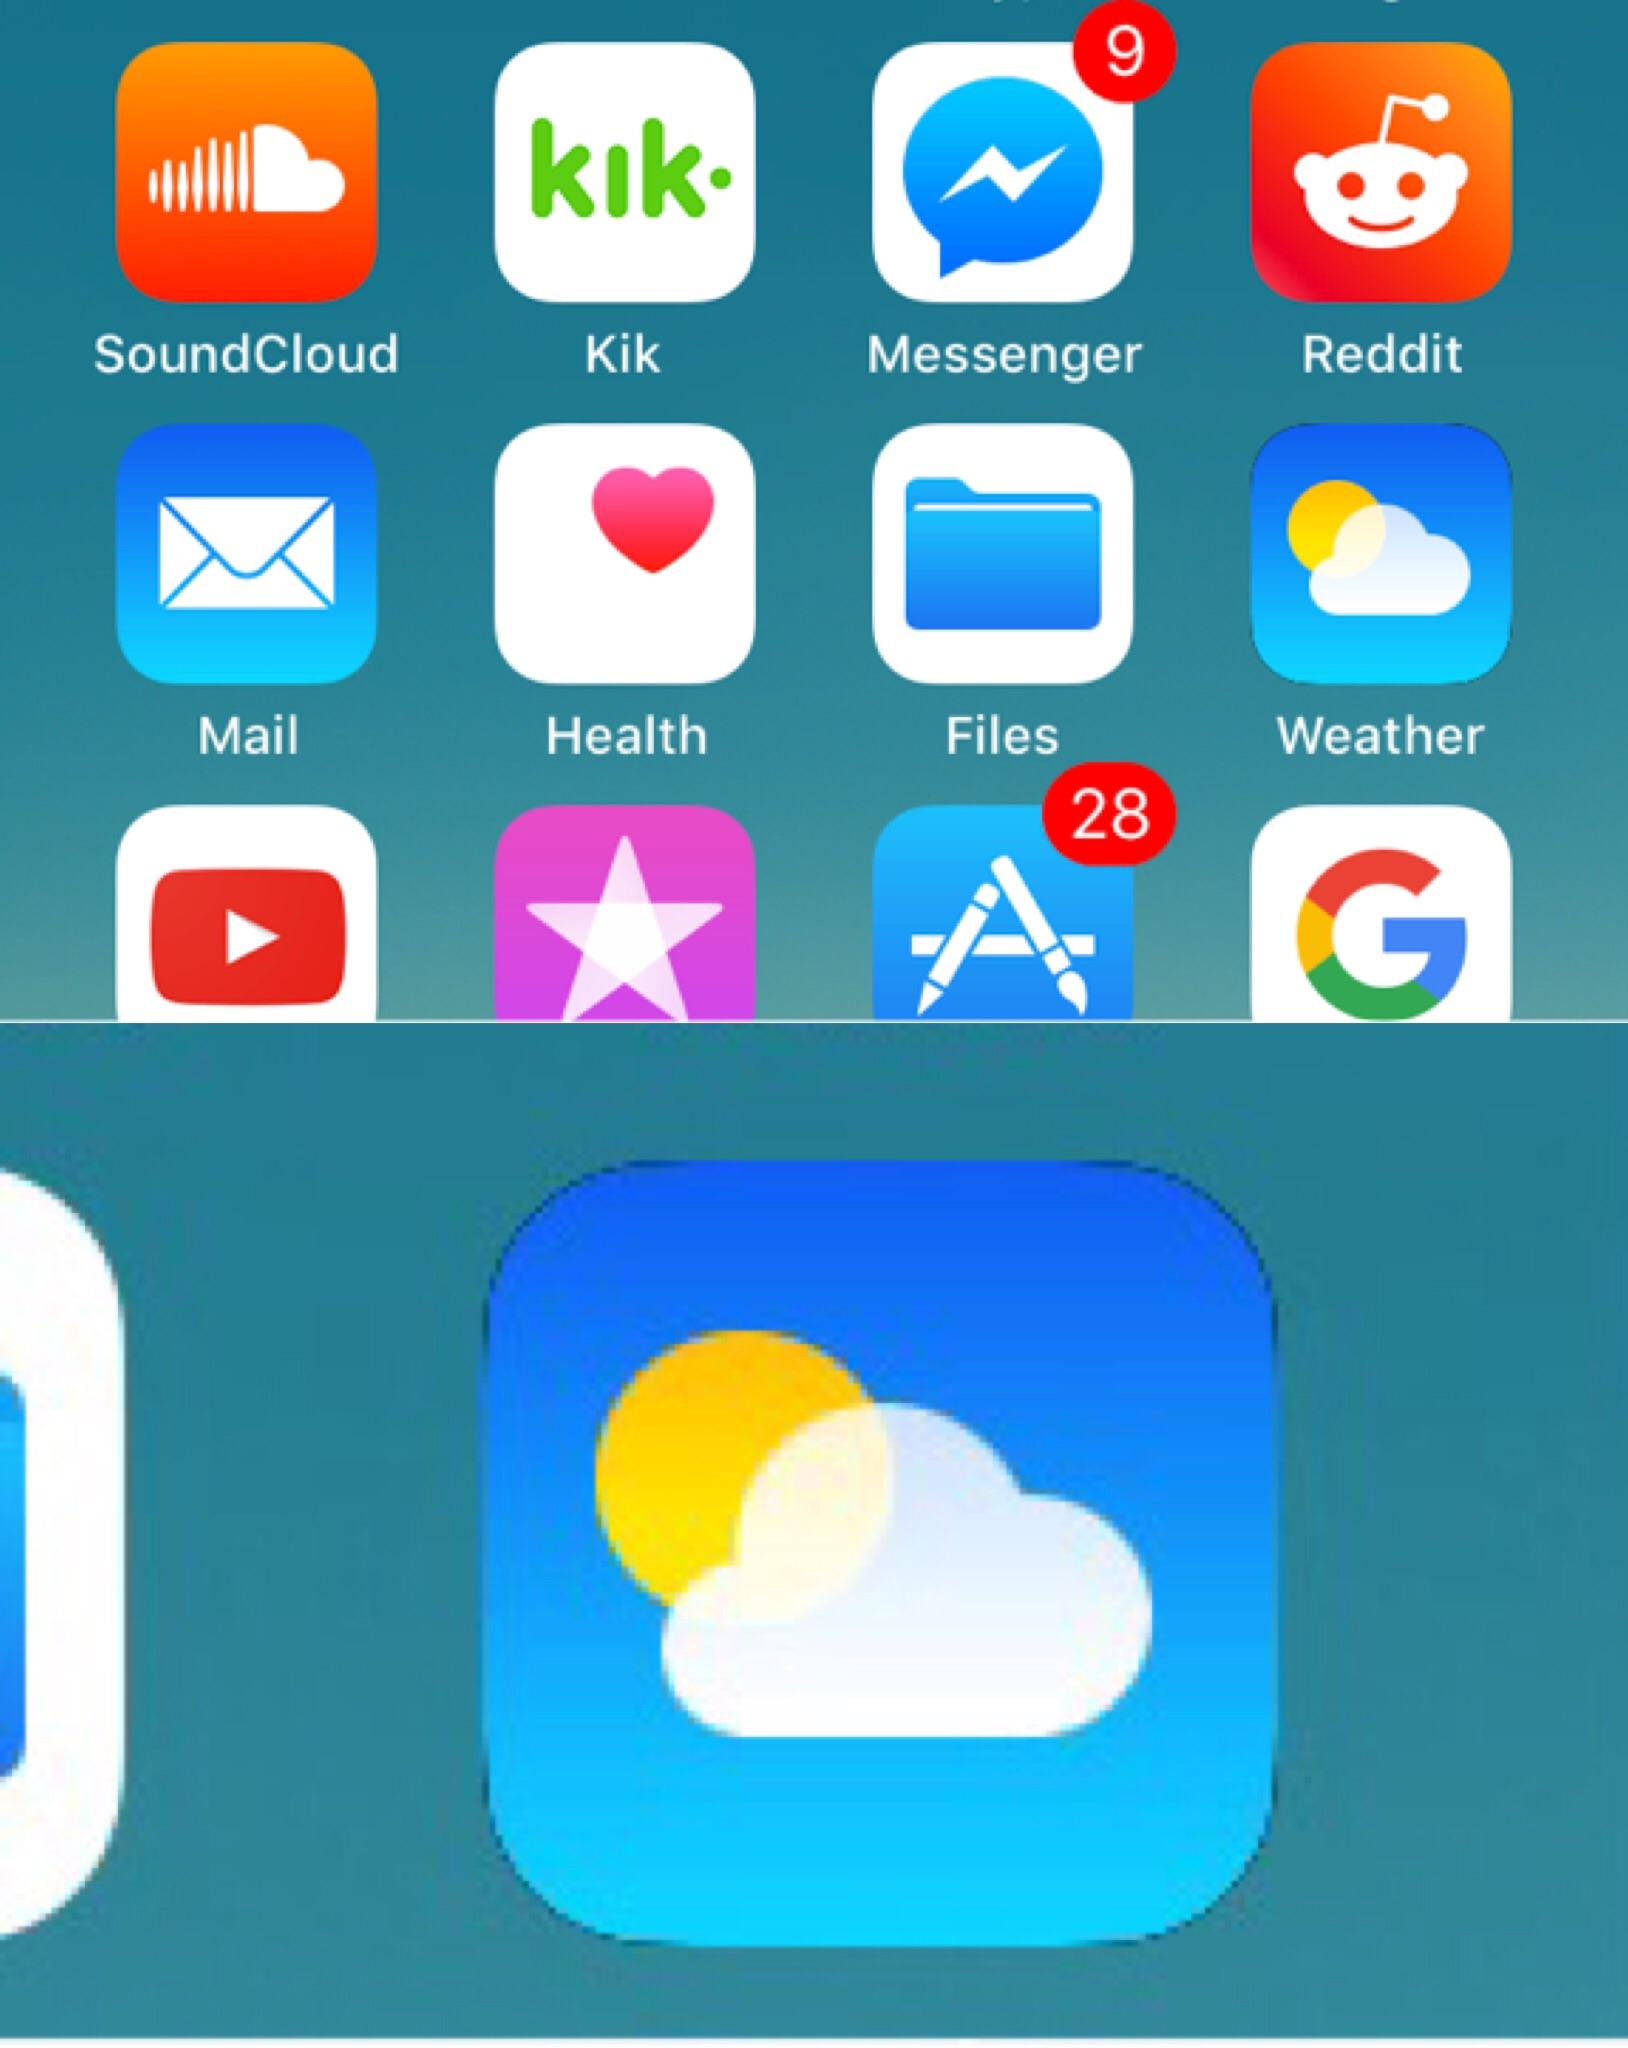 Weather App Logo - BUGS] Weather app icon has black edges. Looks like it's a fake icon ...